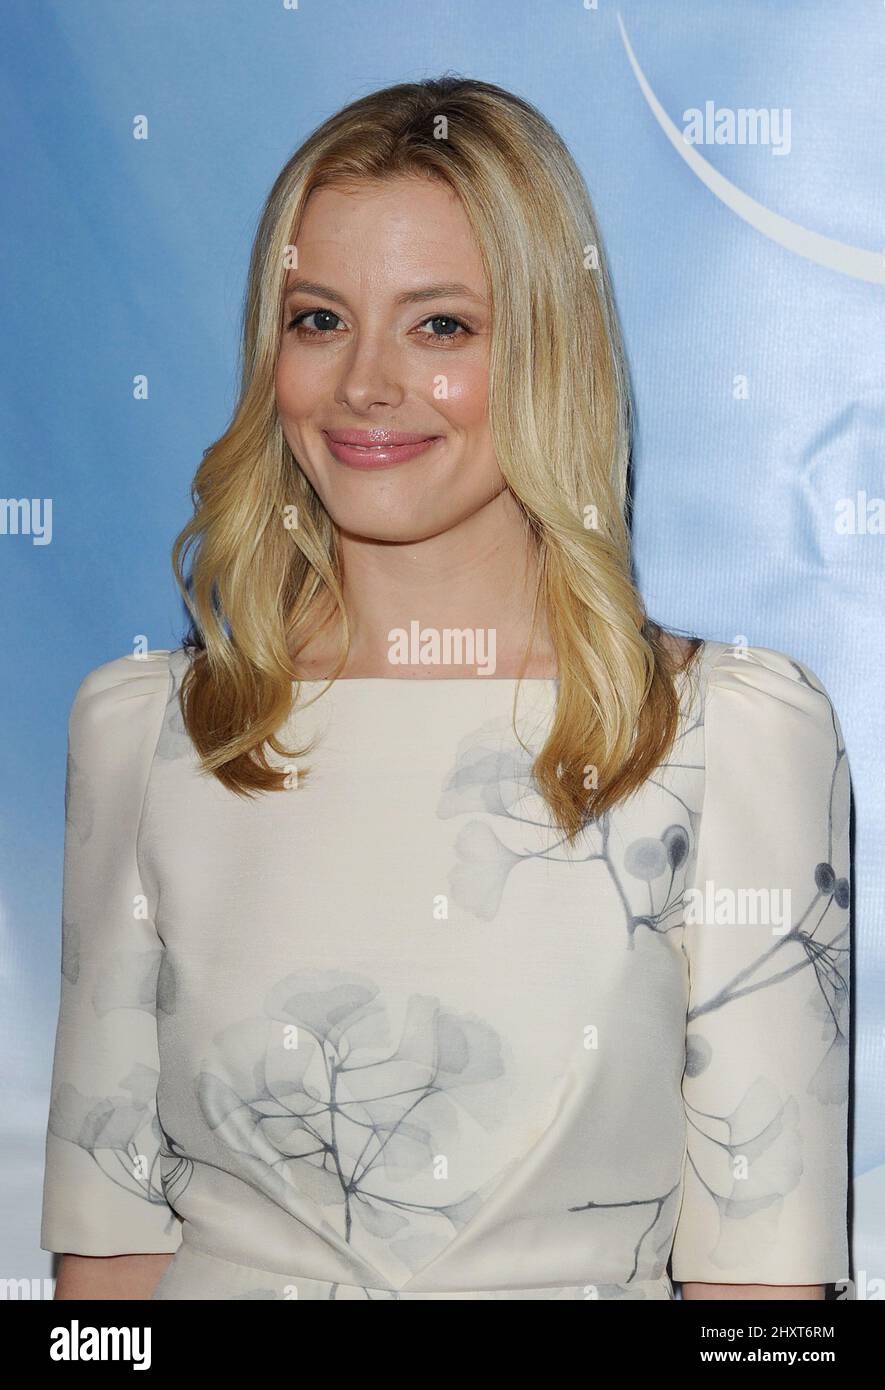 Gillian Jacobs during the 2011 TCA Winter Press Tour for NBC Network held at The Langdon Hotel, California Stock Photo